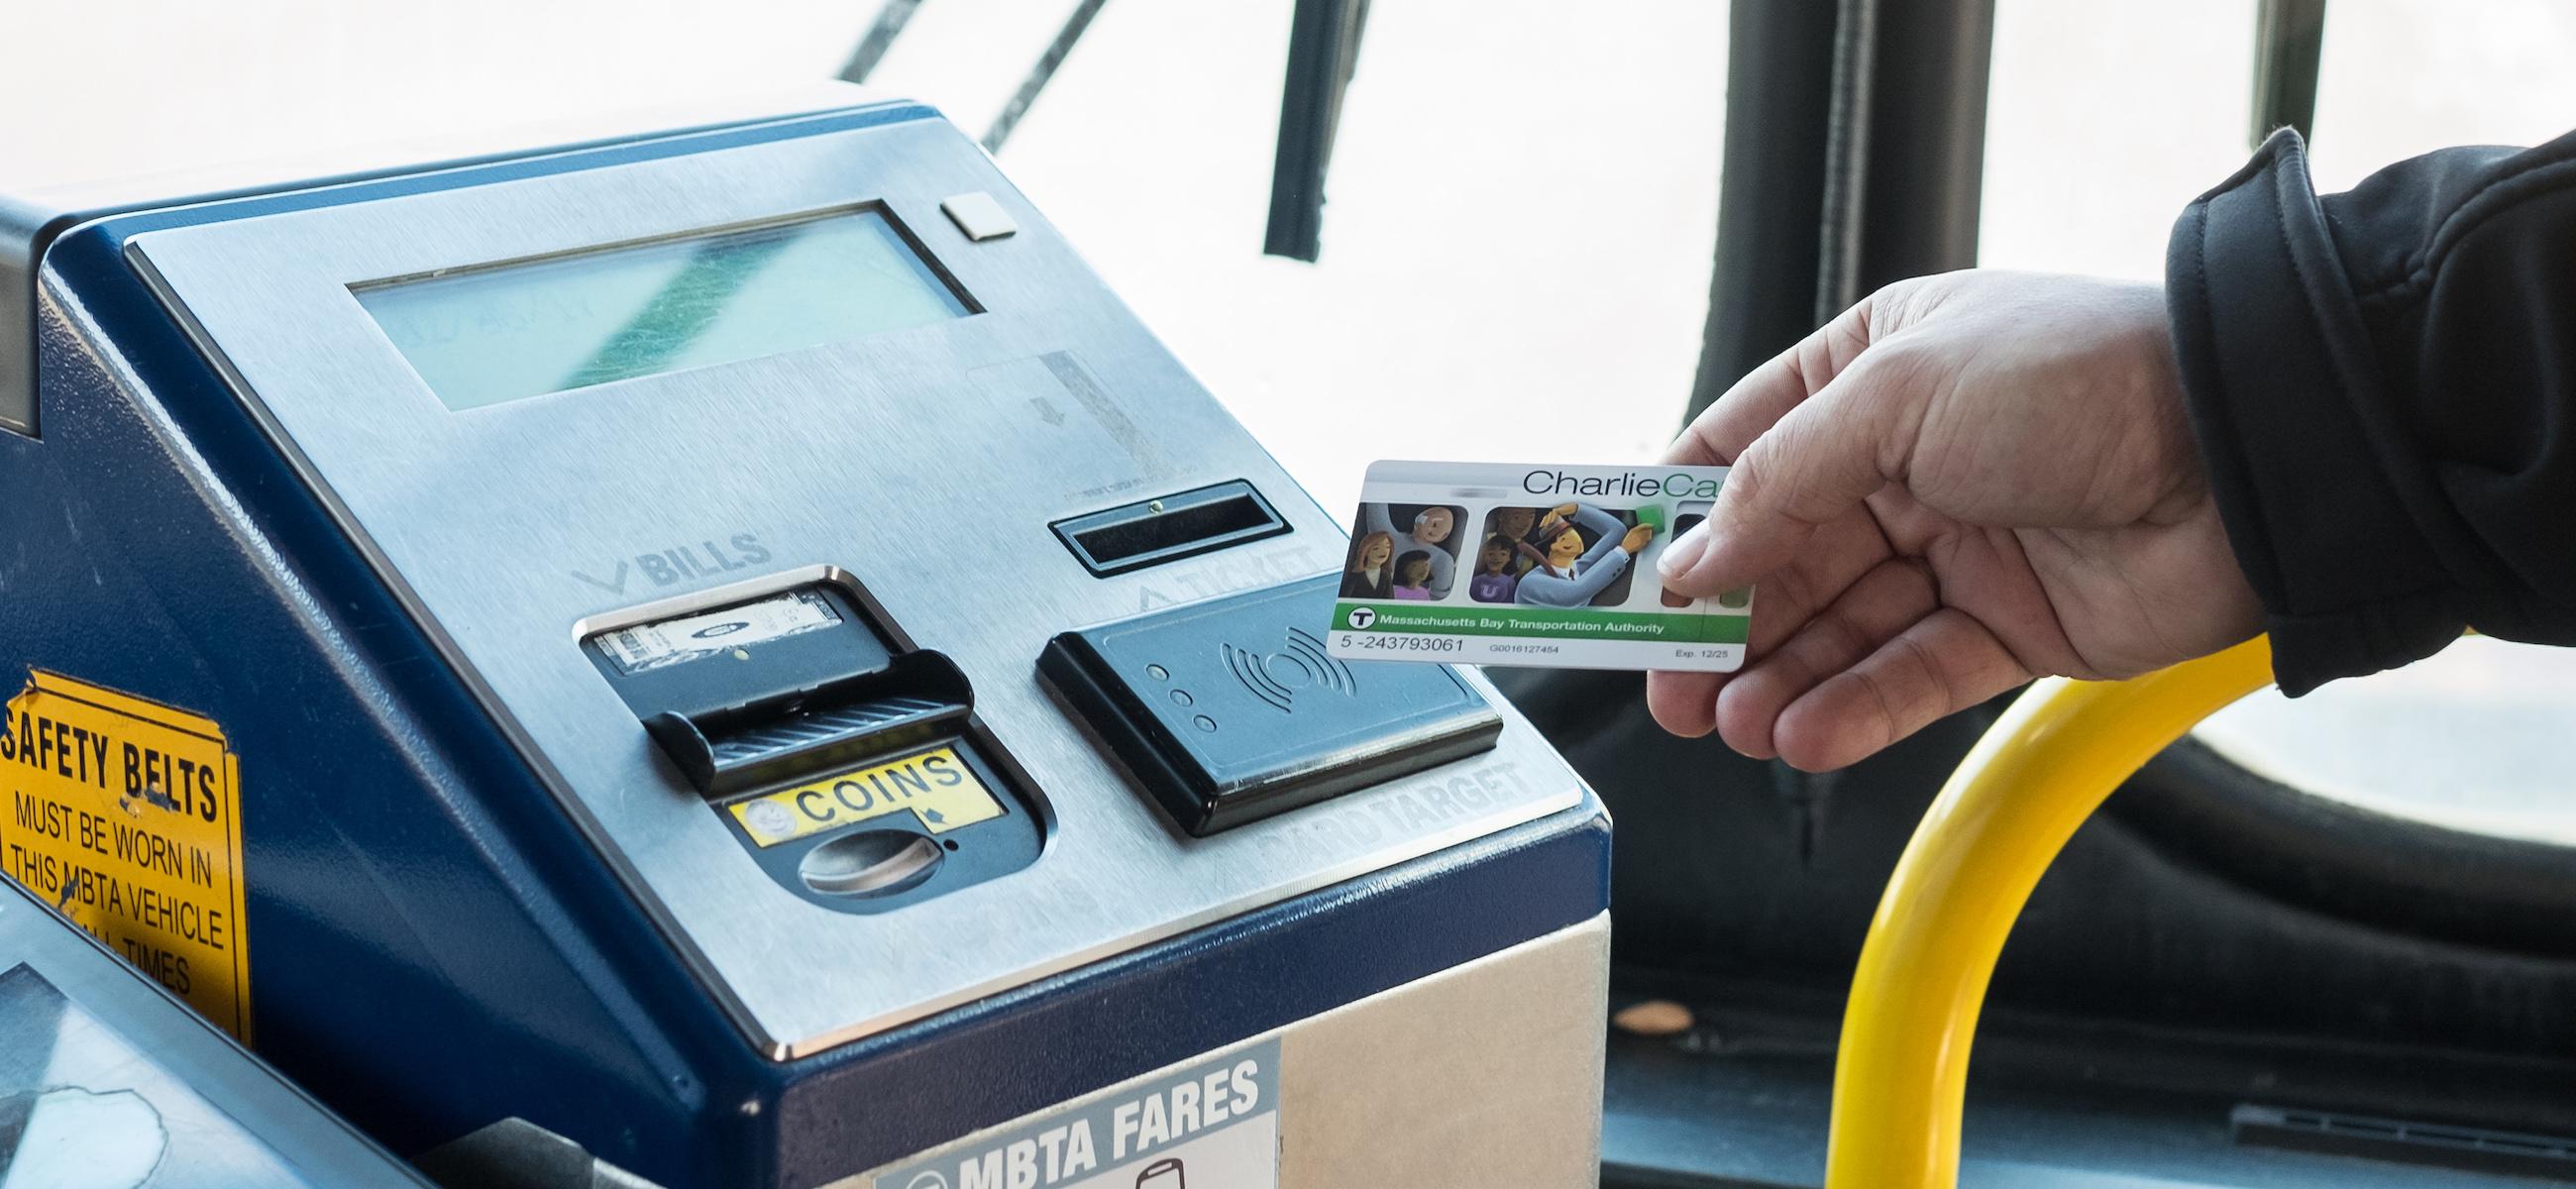 customer paying fare with charliecard